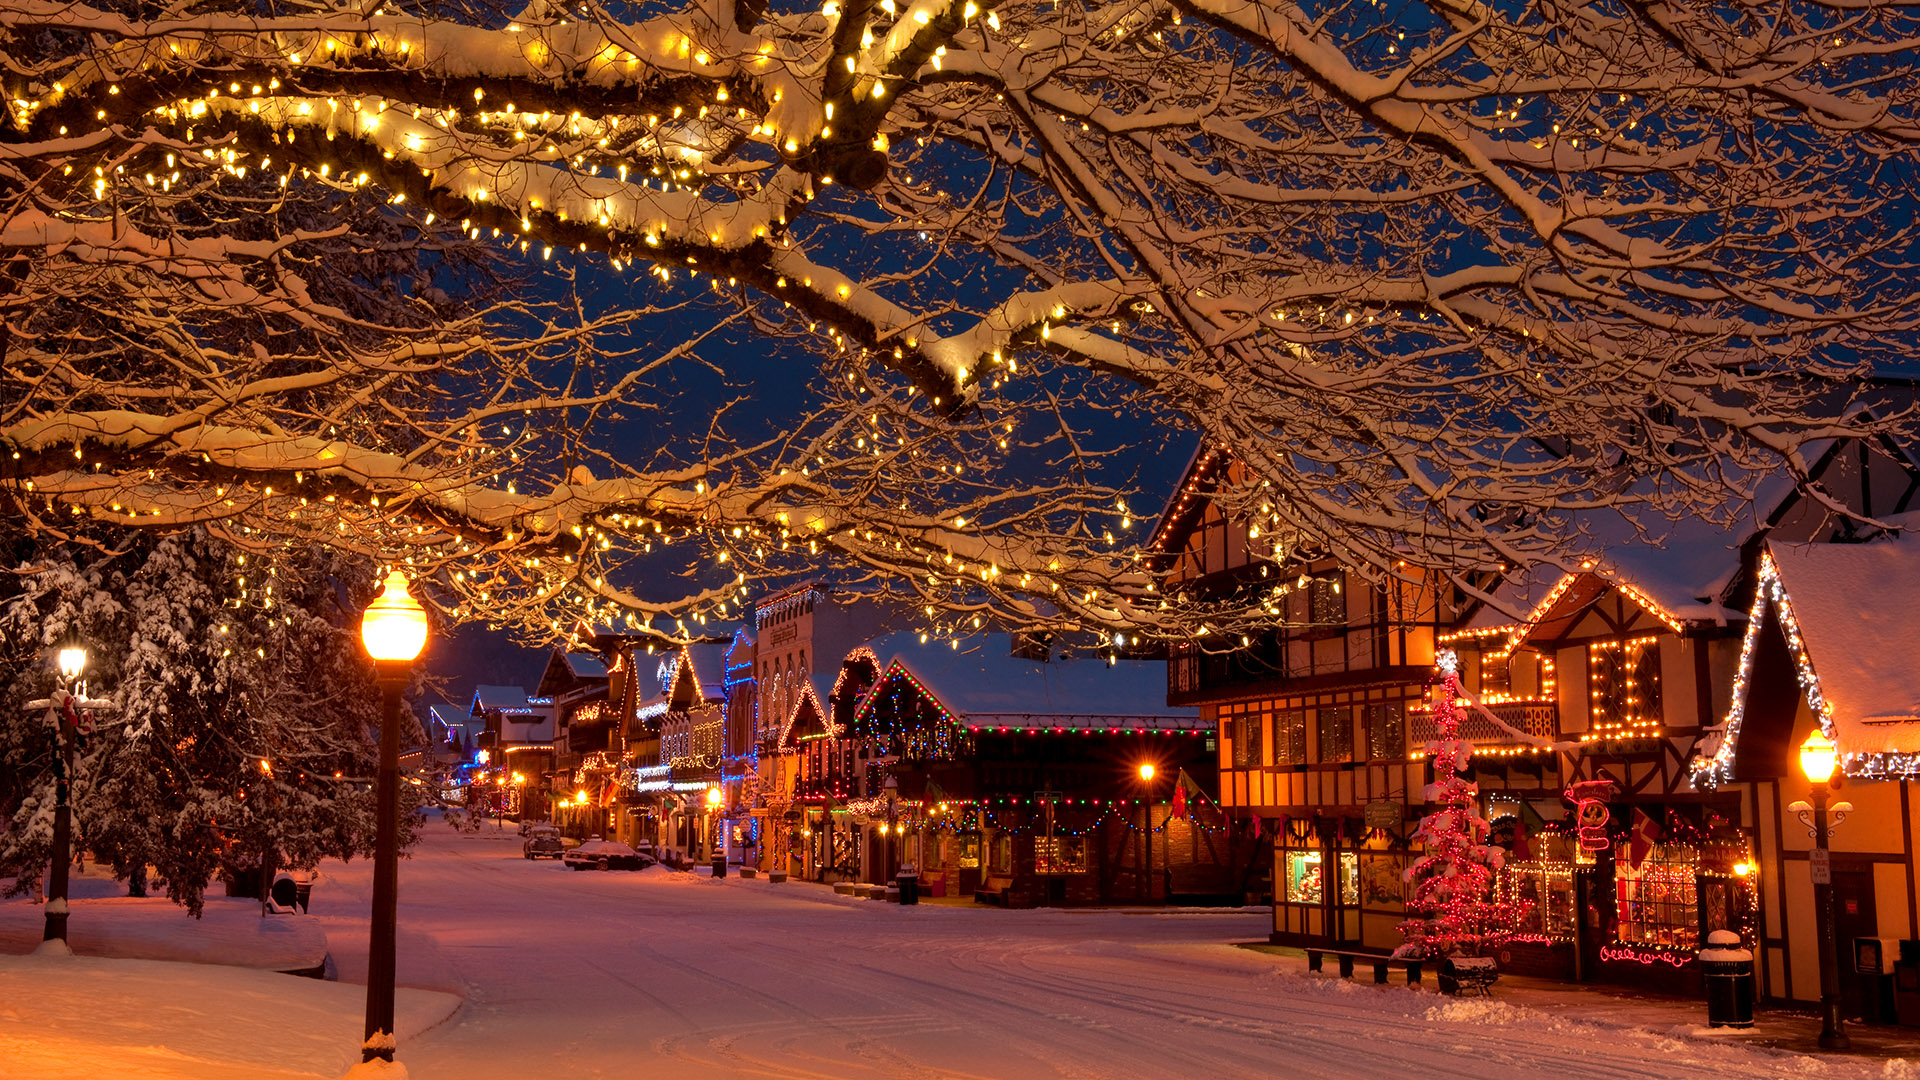 Christmas holiday lights in the Bavarianstyle village of Leavenworth